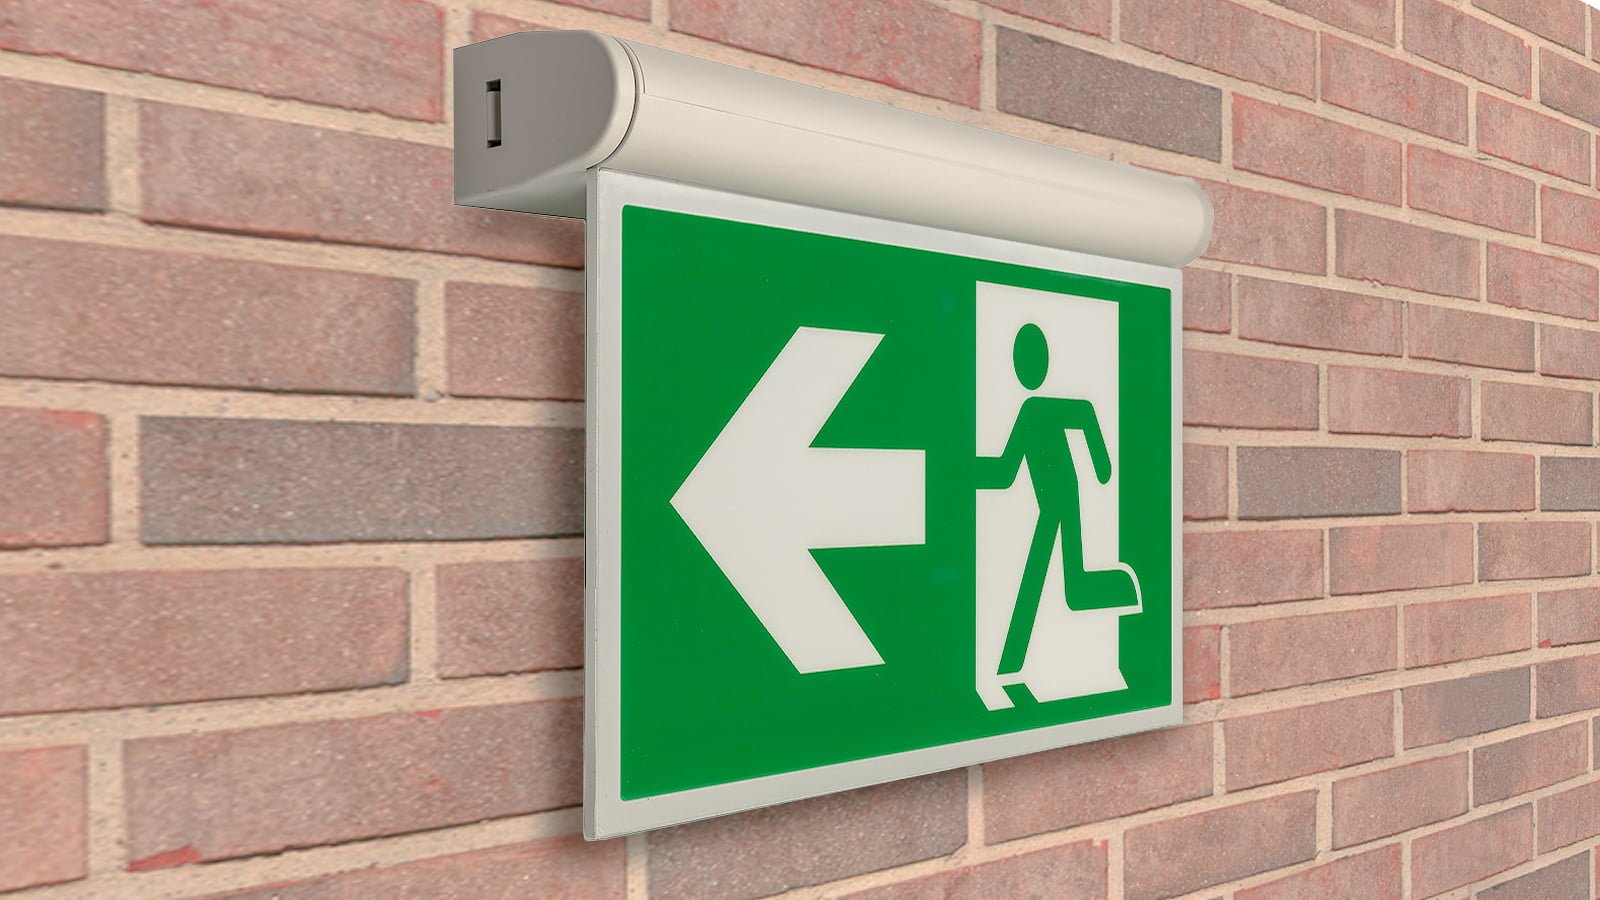 led-emergency-exit-sign-with-test-emergency-signs-sera-technologies